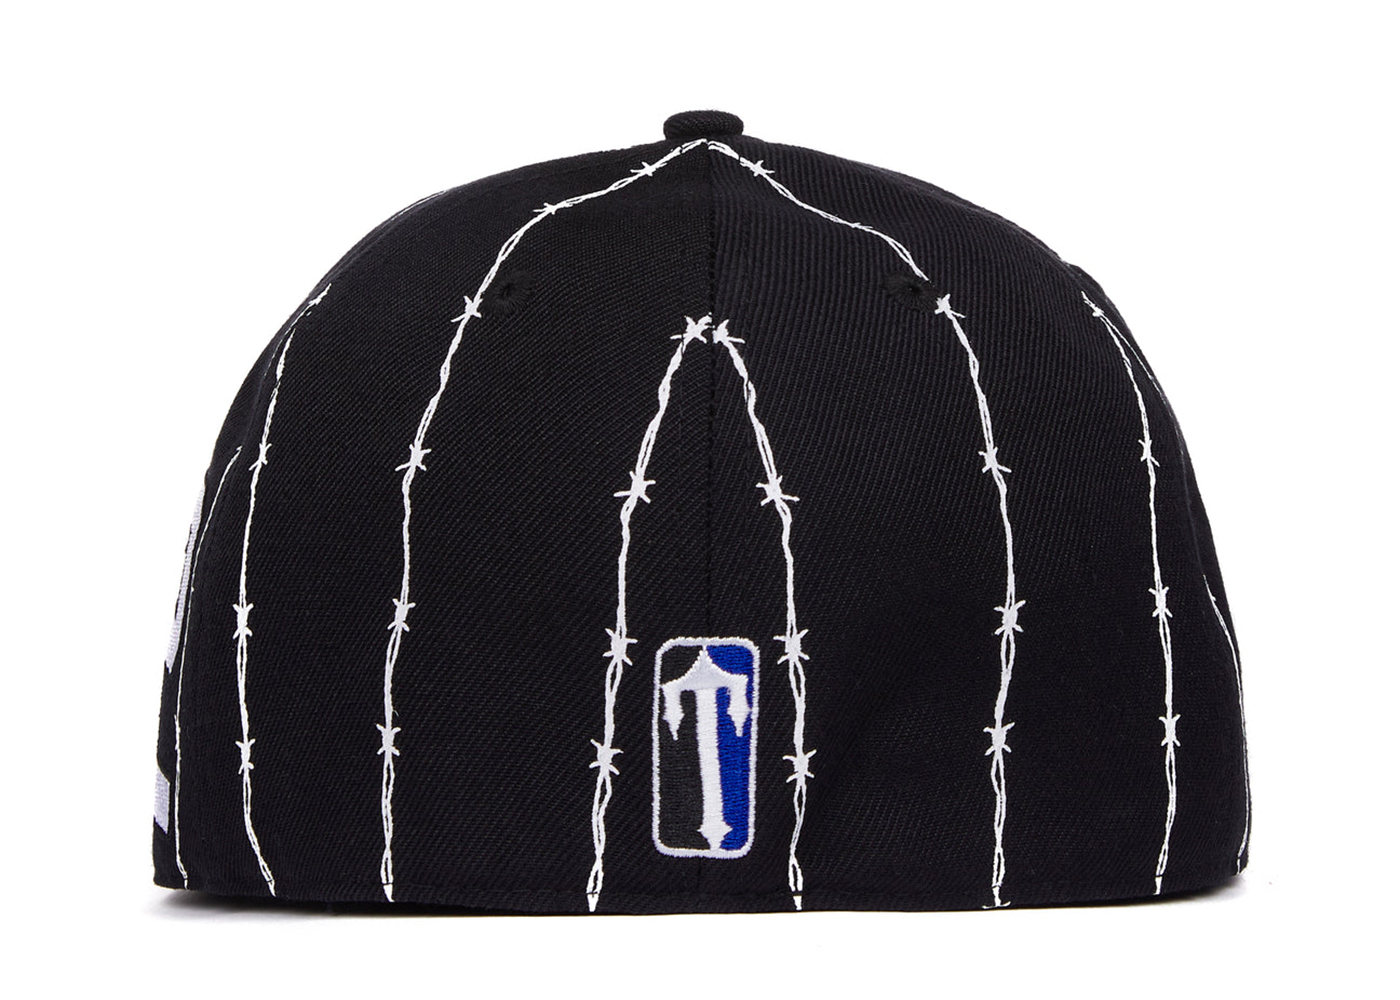 Trapstar Shooters Barbed Wire Fitted Cap Black/Blue - SS23 - JP